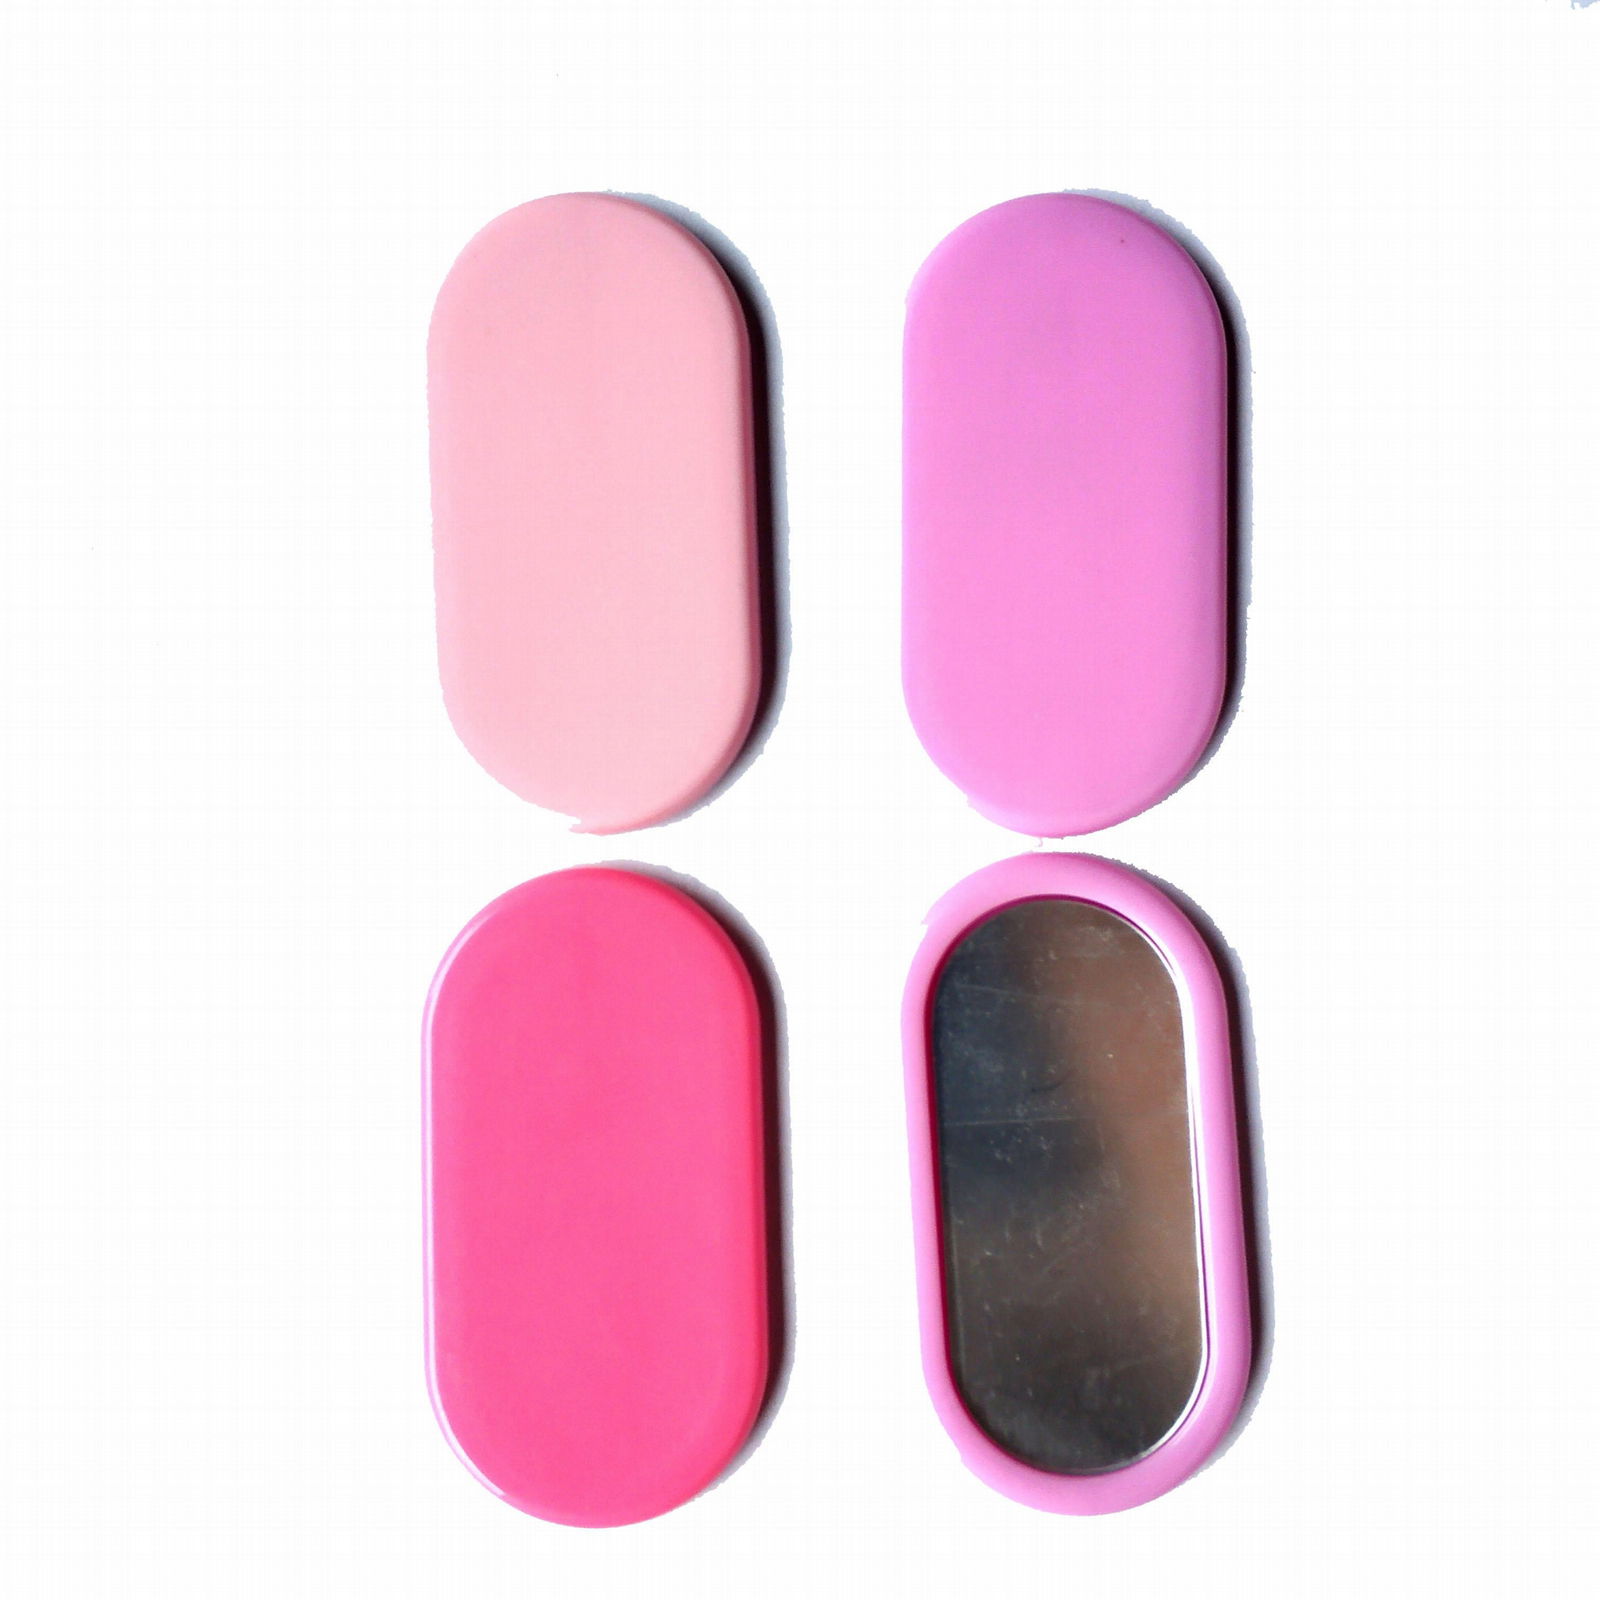 6cm plastic small round shaped pocket mirror for makeup gift set 5